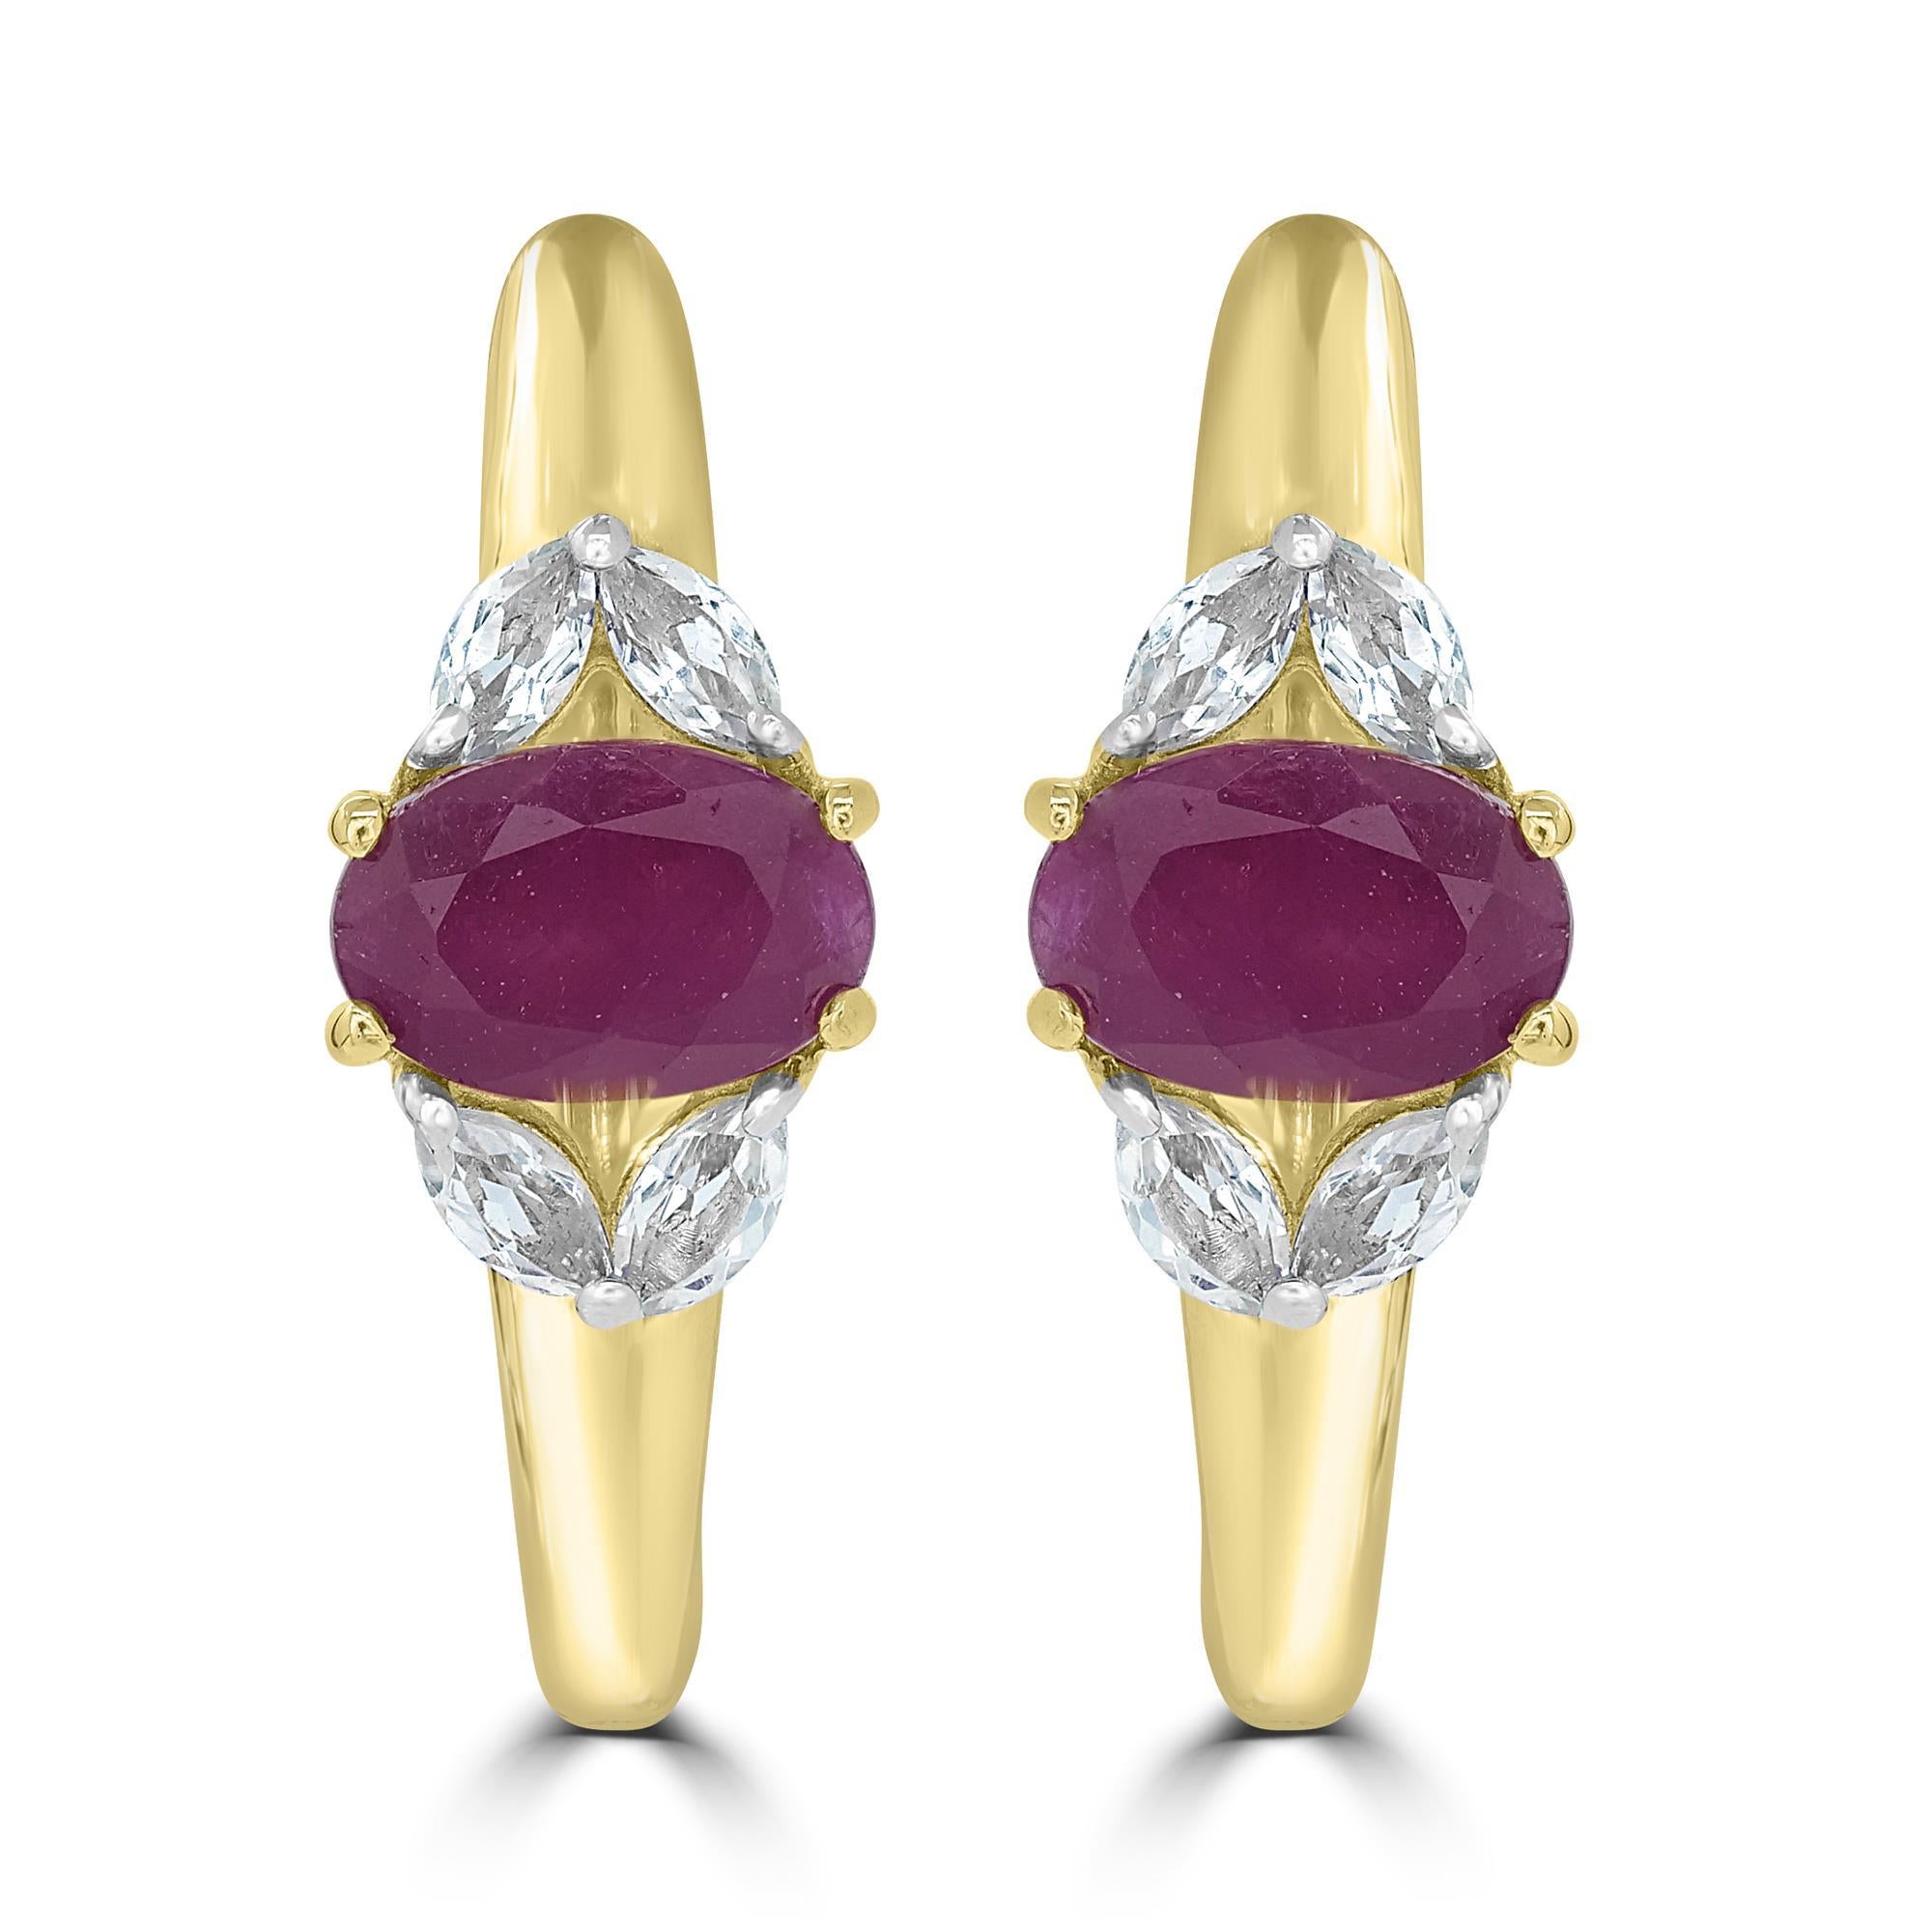 This 14K gold precious Gemistry gemstone hoop earrings features oval-shaped 1.63 carats rubies prong set horizontally on the front of the hoop. The rubies are surrounded on top and bottom by marquise-shaped white topaz stones prong set in 14K white